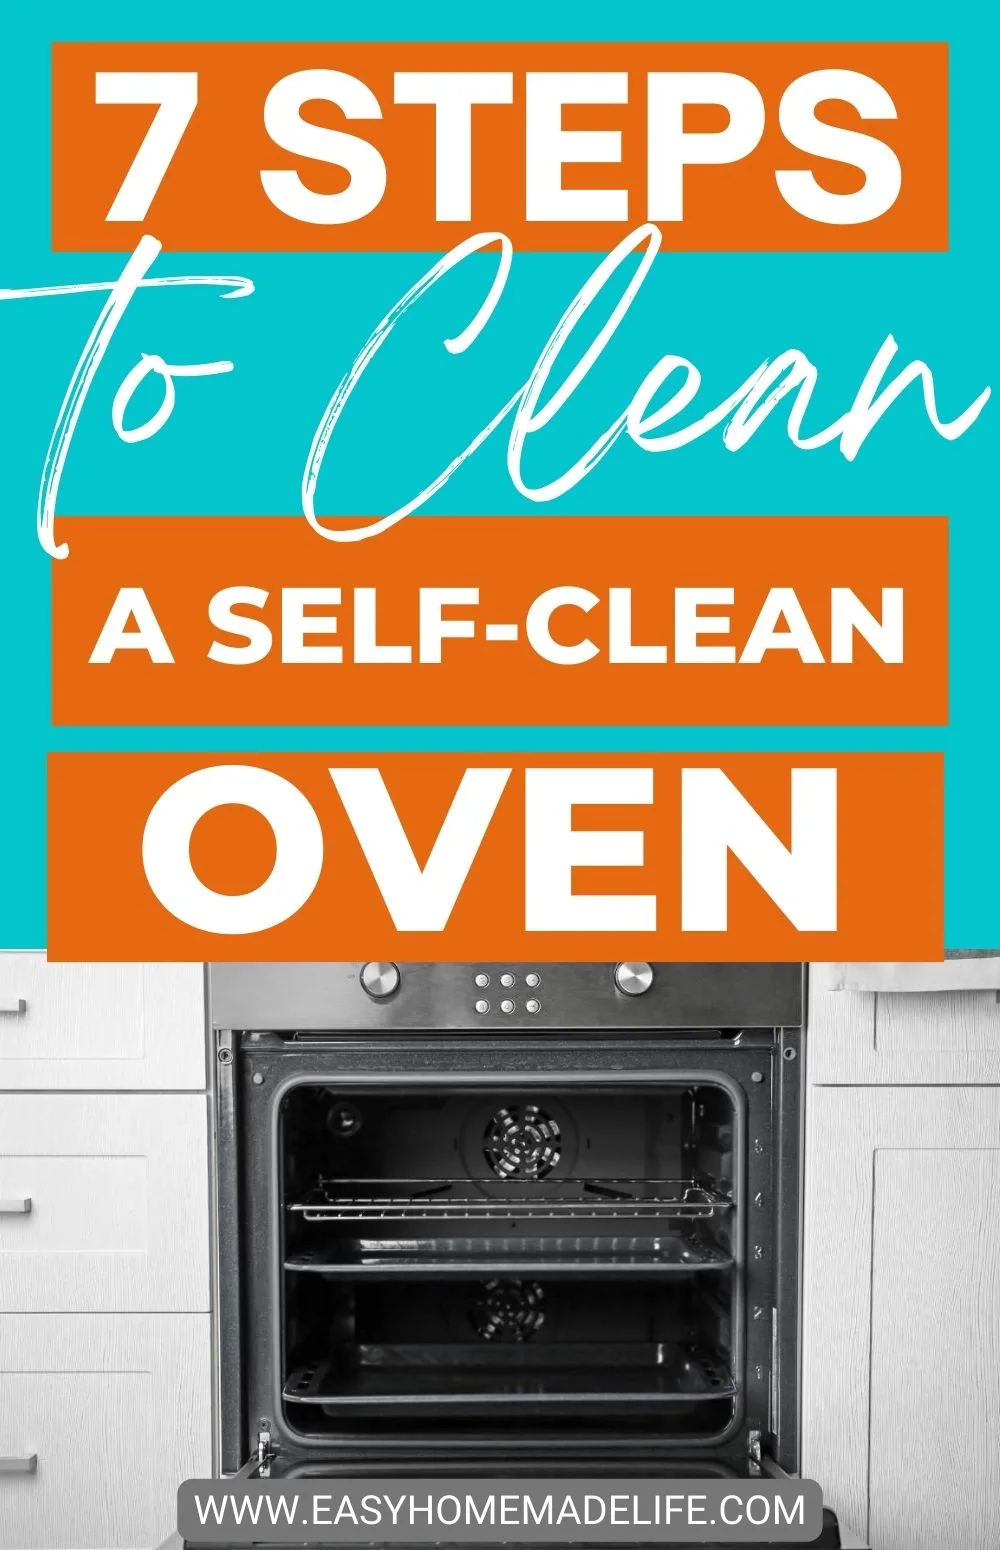 7 steps to clean a self - clean oven.